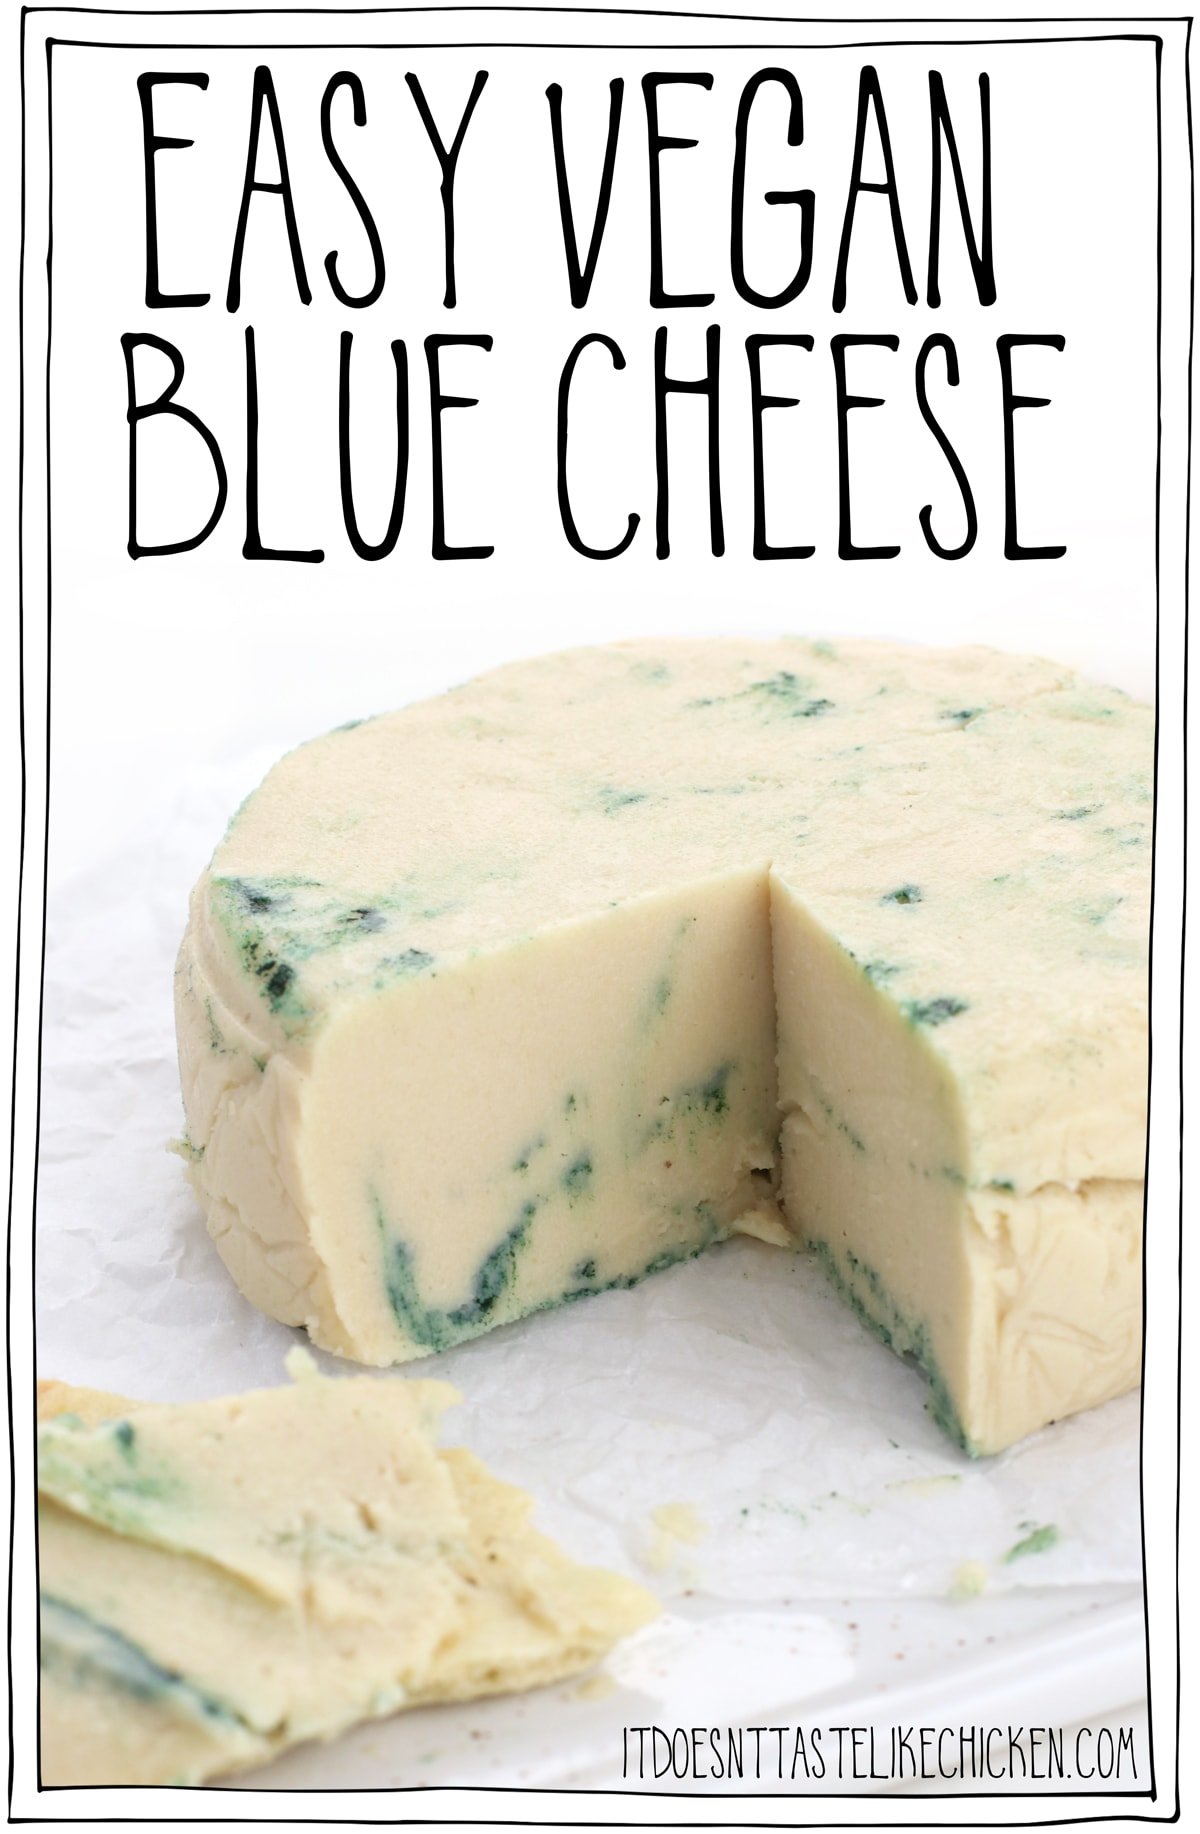 Easy Vegan Blue Cheese Recipe! Just 8 ingredients, 20 minutes to make (plus chilling time), and you can make your own homemade vegan blue cheese! This dairy-free cheese is creamy, tangy, got that funky kick to it, and even has the pretty green and blue veins throughout. #itdoesnttastelikechicken #veganrecipes #vegancheese